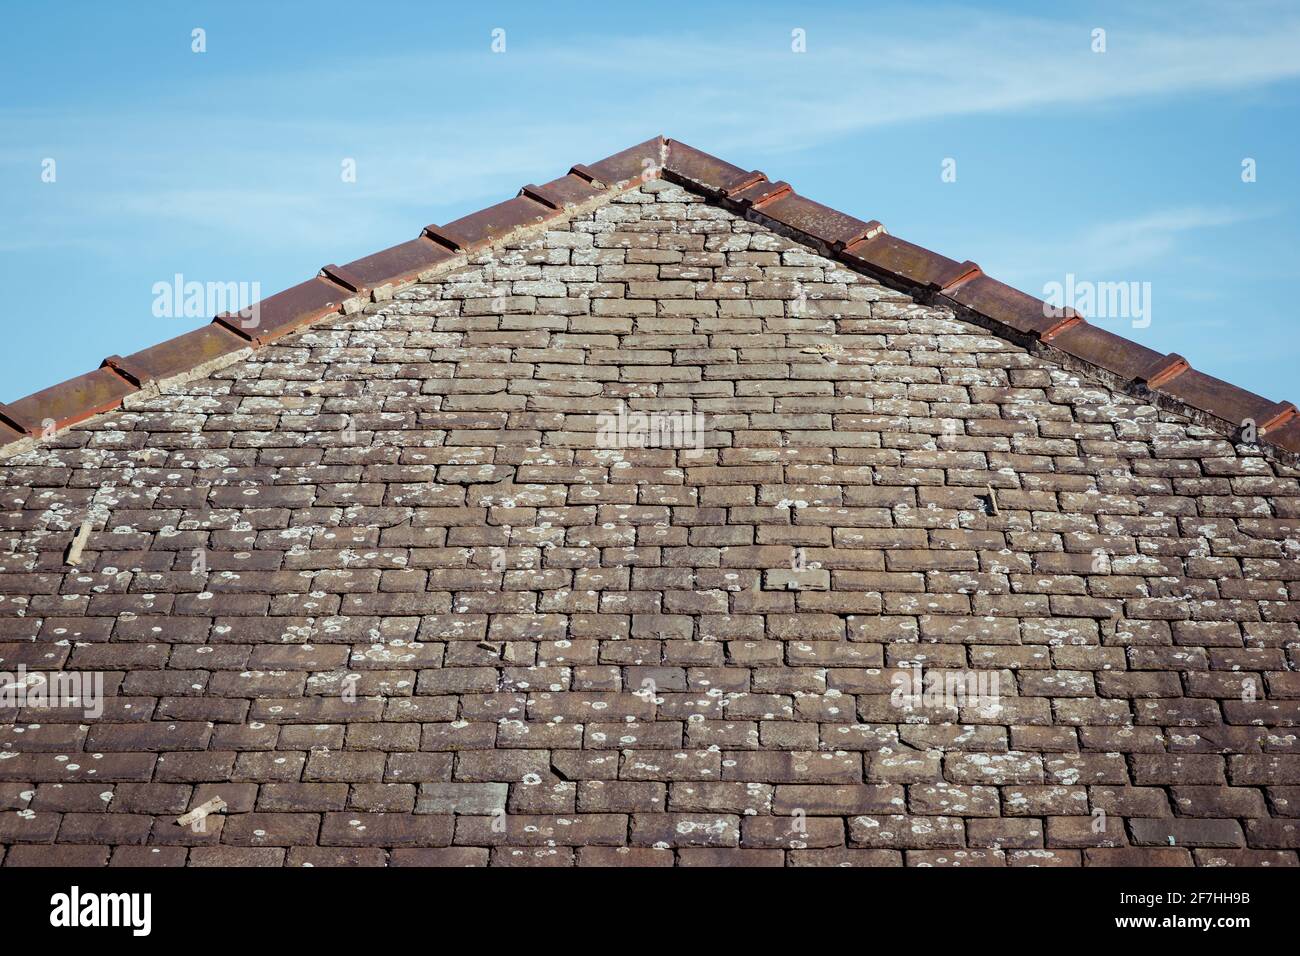 A triangle or hip roof end showing the ridge, mortar and lichen on the old damaged traditional stone slate tiles Stock Photo